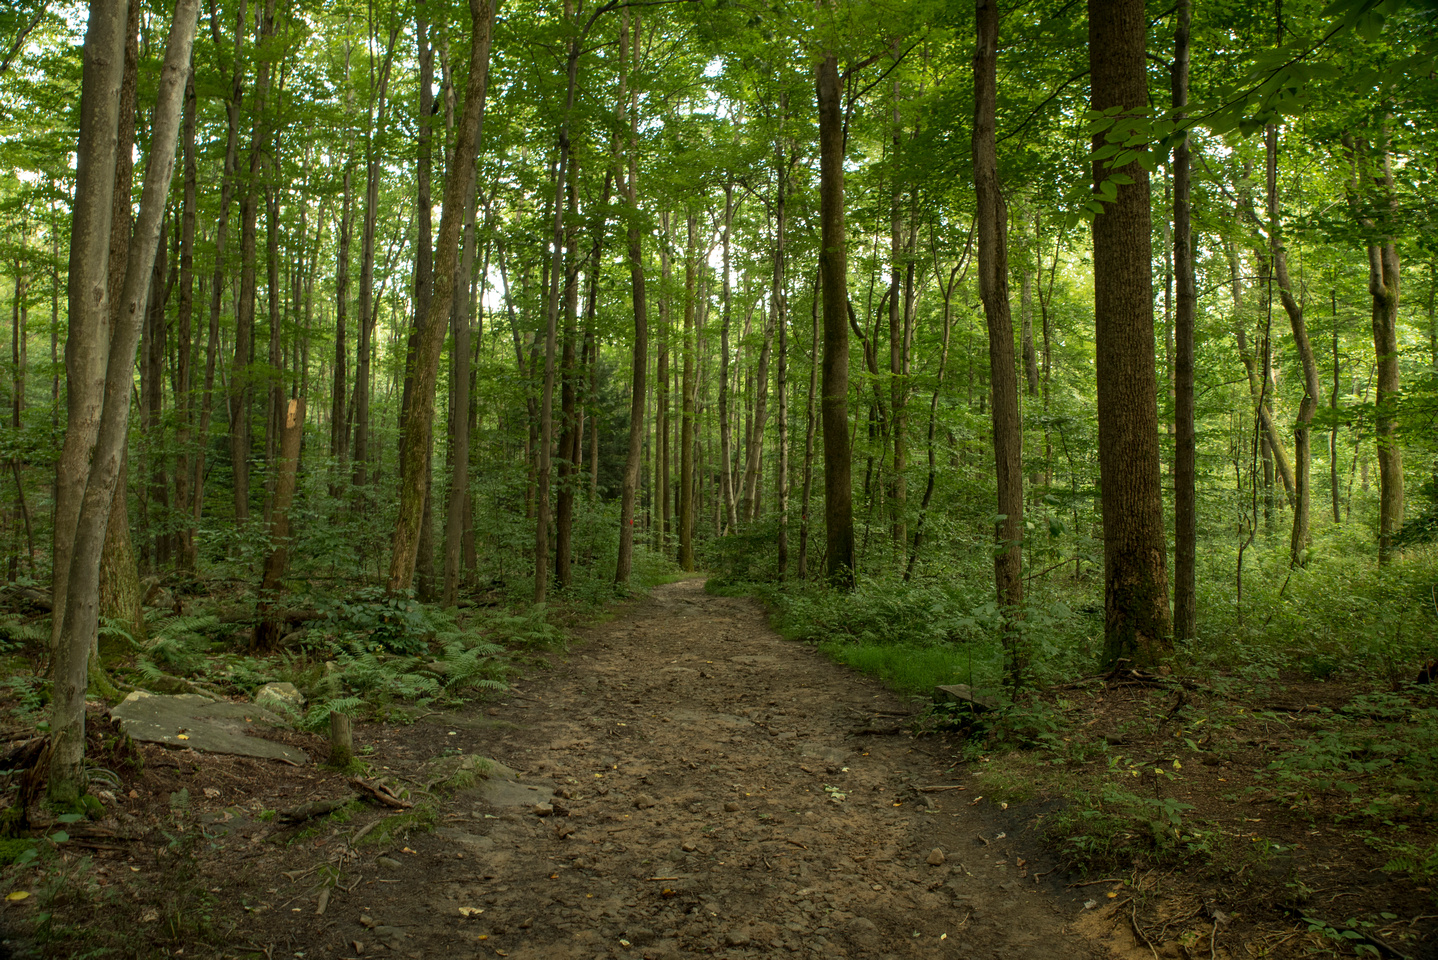 A winding path in Coopers Rock State Forest